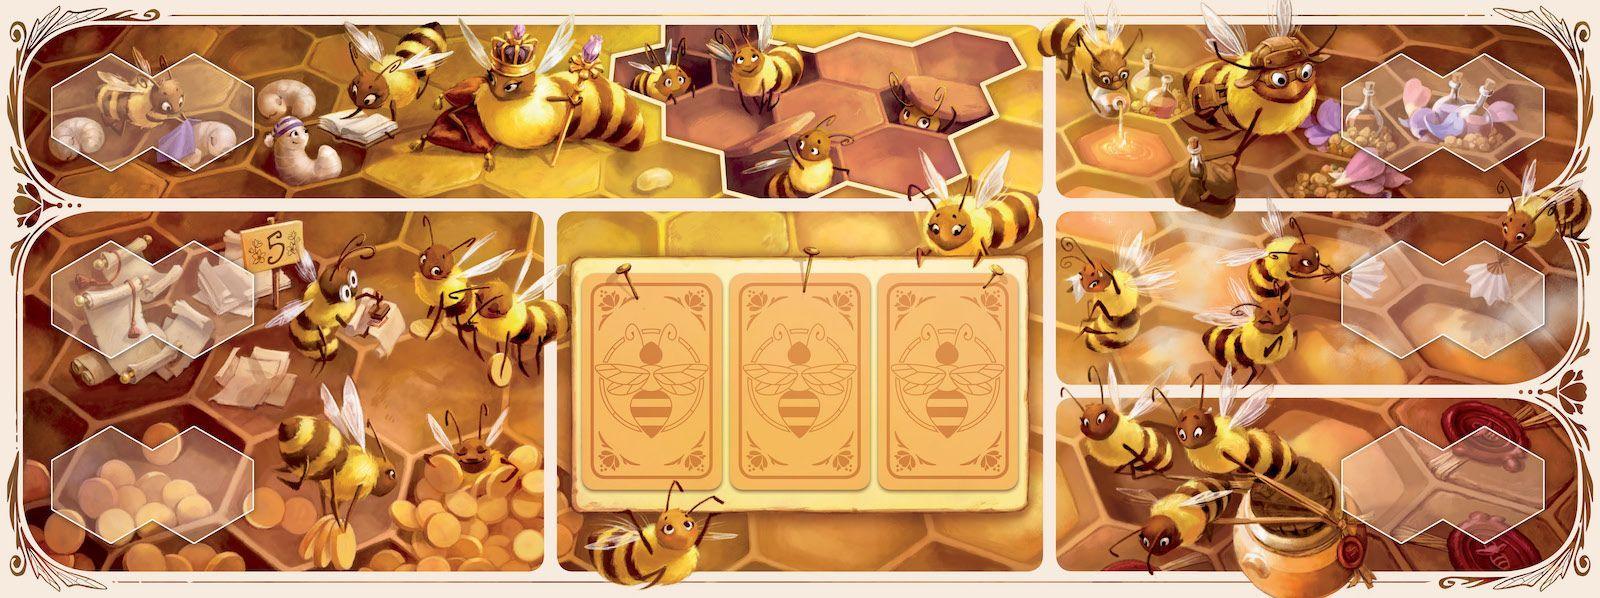 Honey Buzz (Standard Edition) - Gaming Library